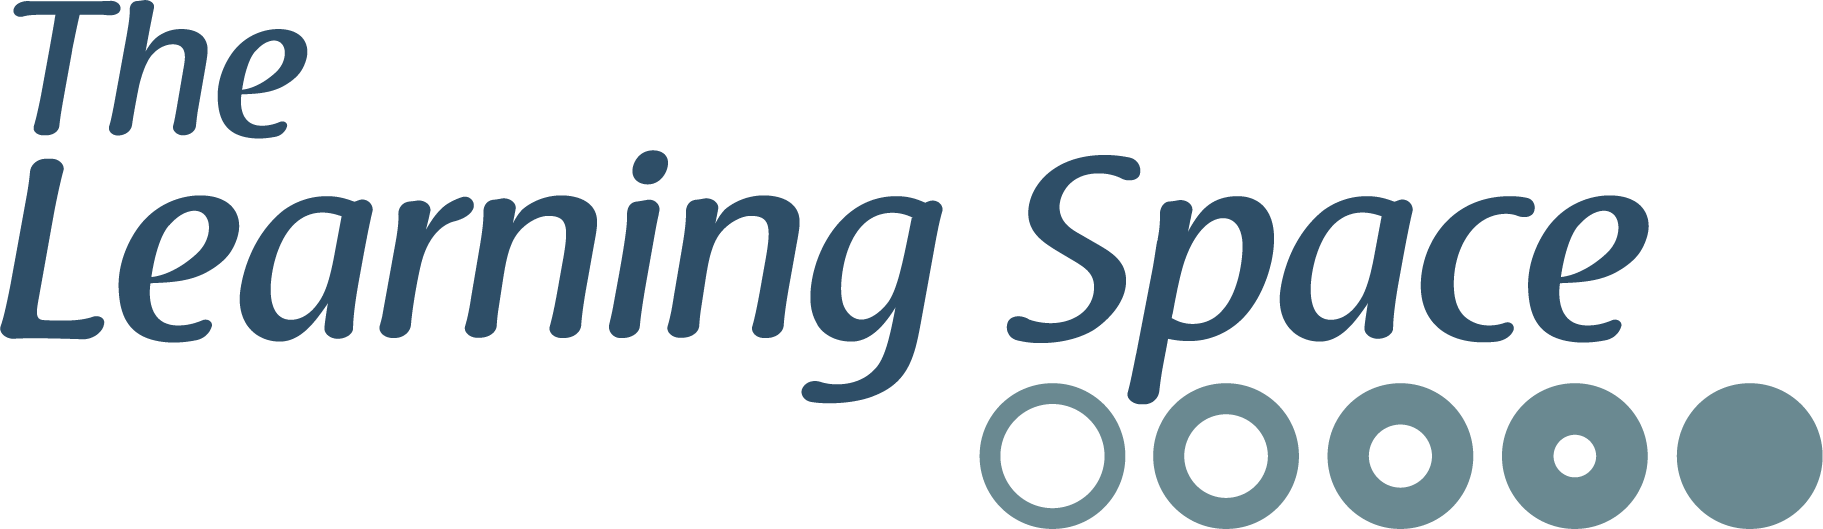 The Learning Space Logo